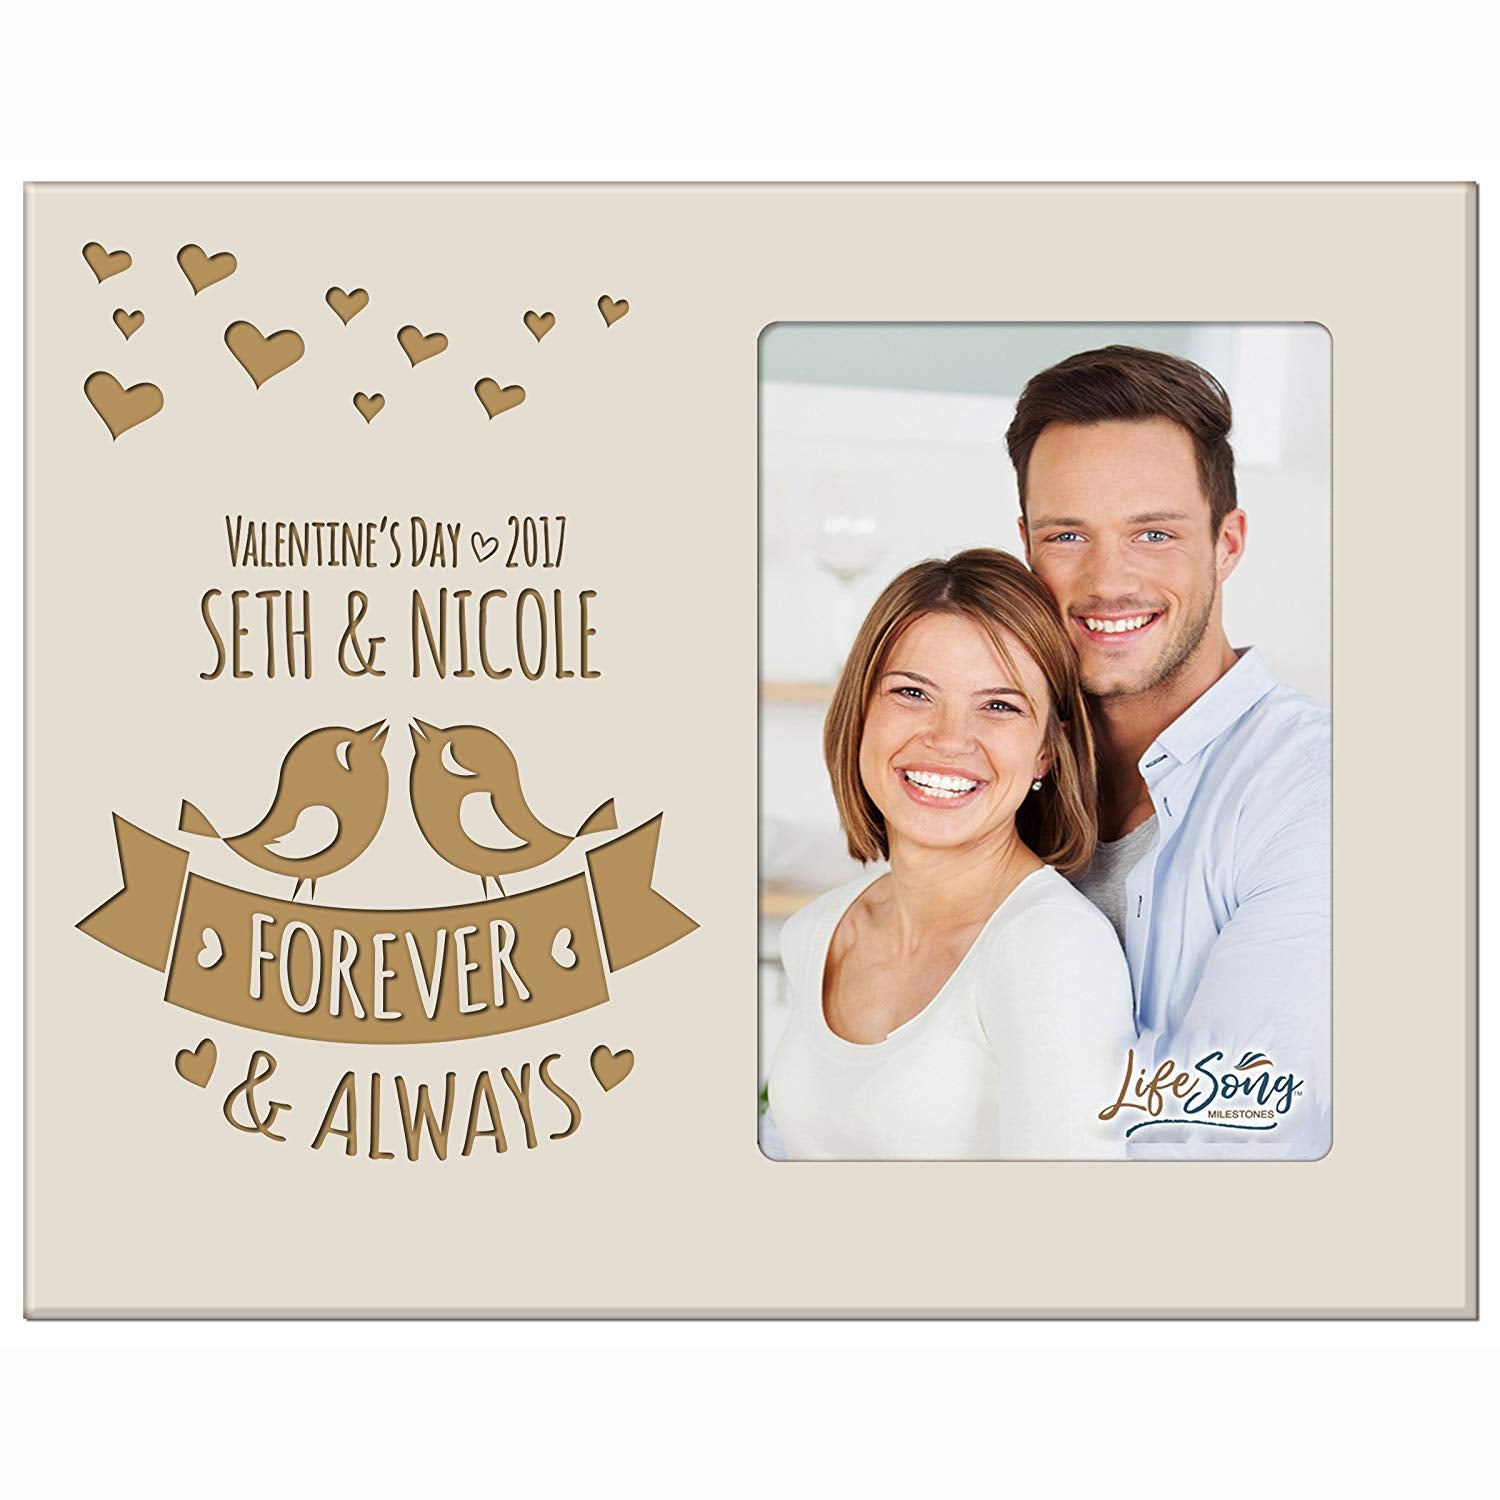 Personalized Valentine's Day Photo Frame - Forever & Always - LifeSong Milestones